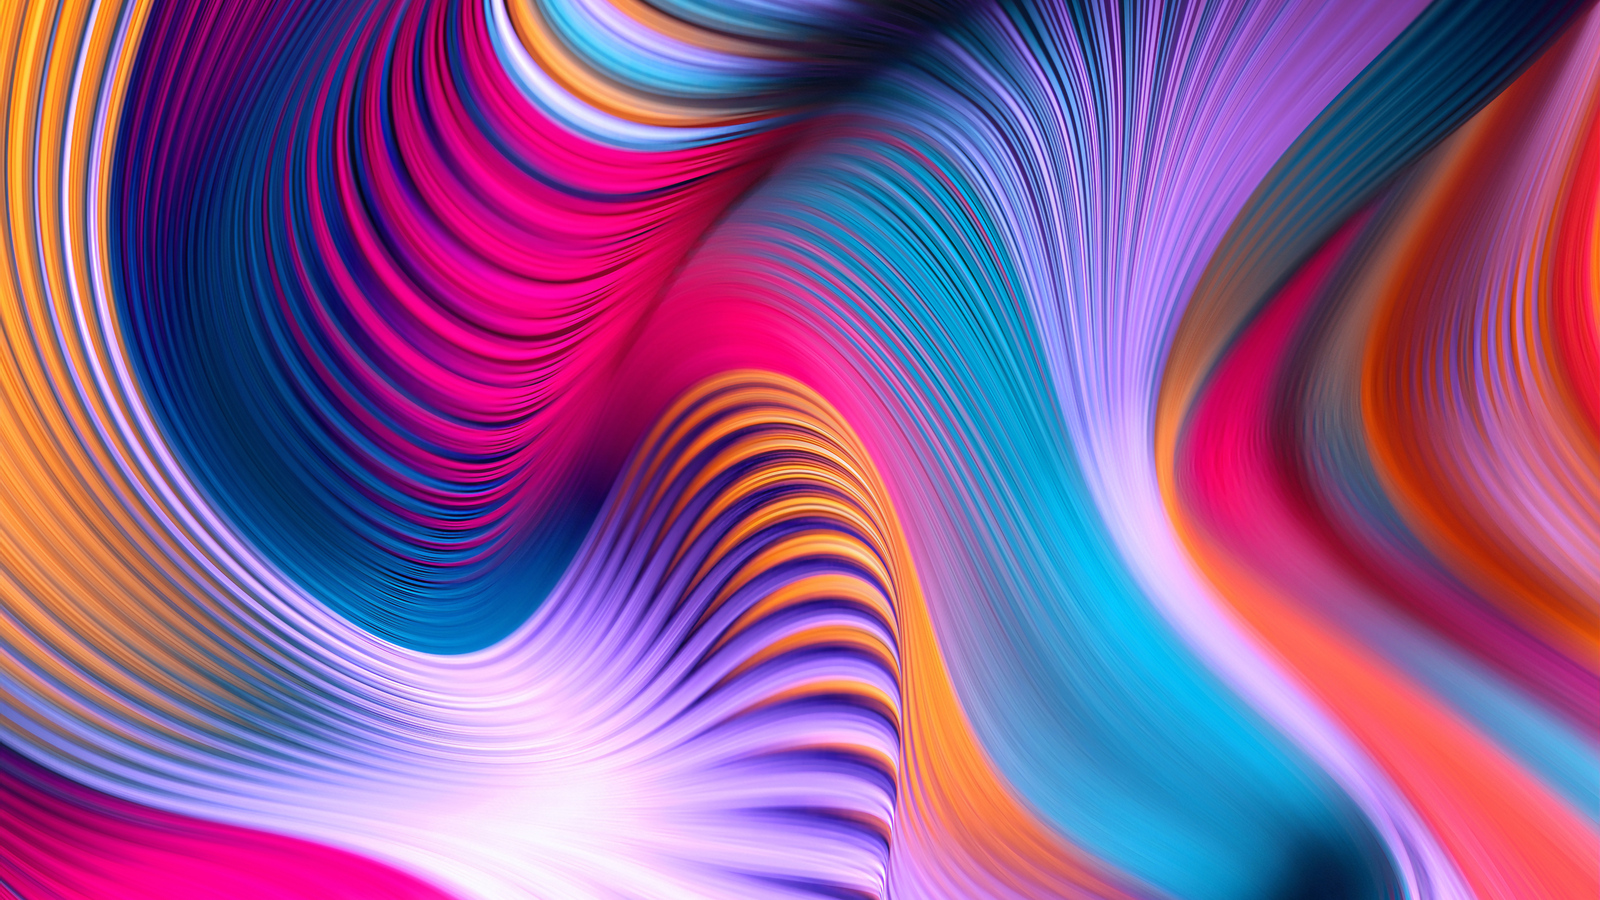 1600x900 Colorful Movements Of Abstract Art 4k 1600x900 Resolution HD ...